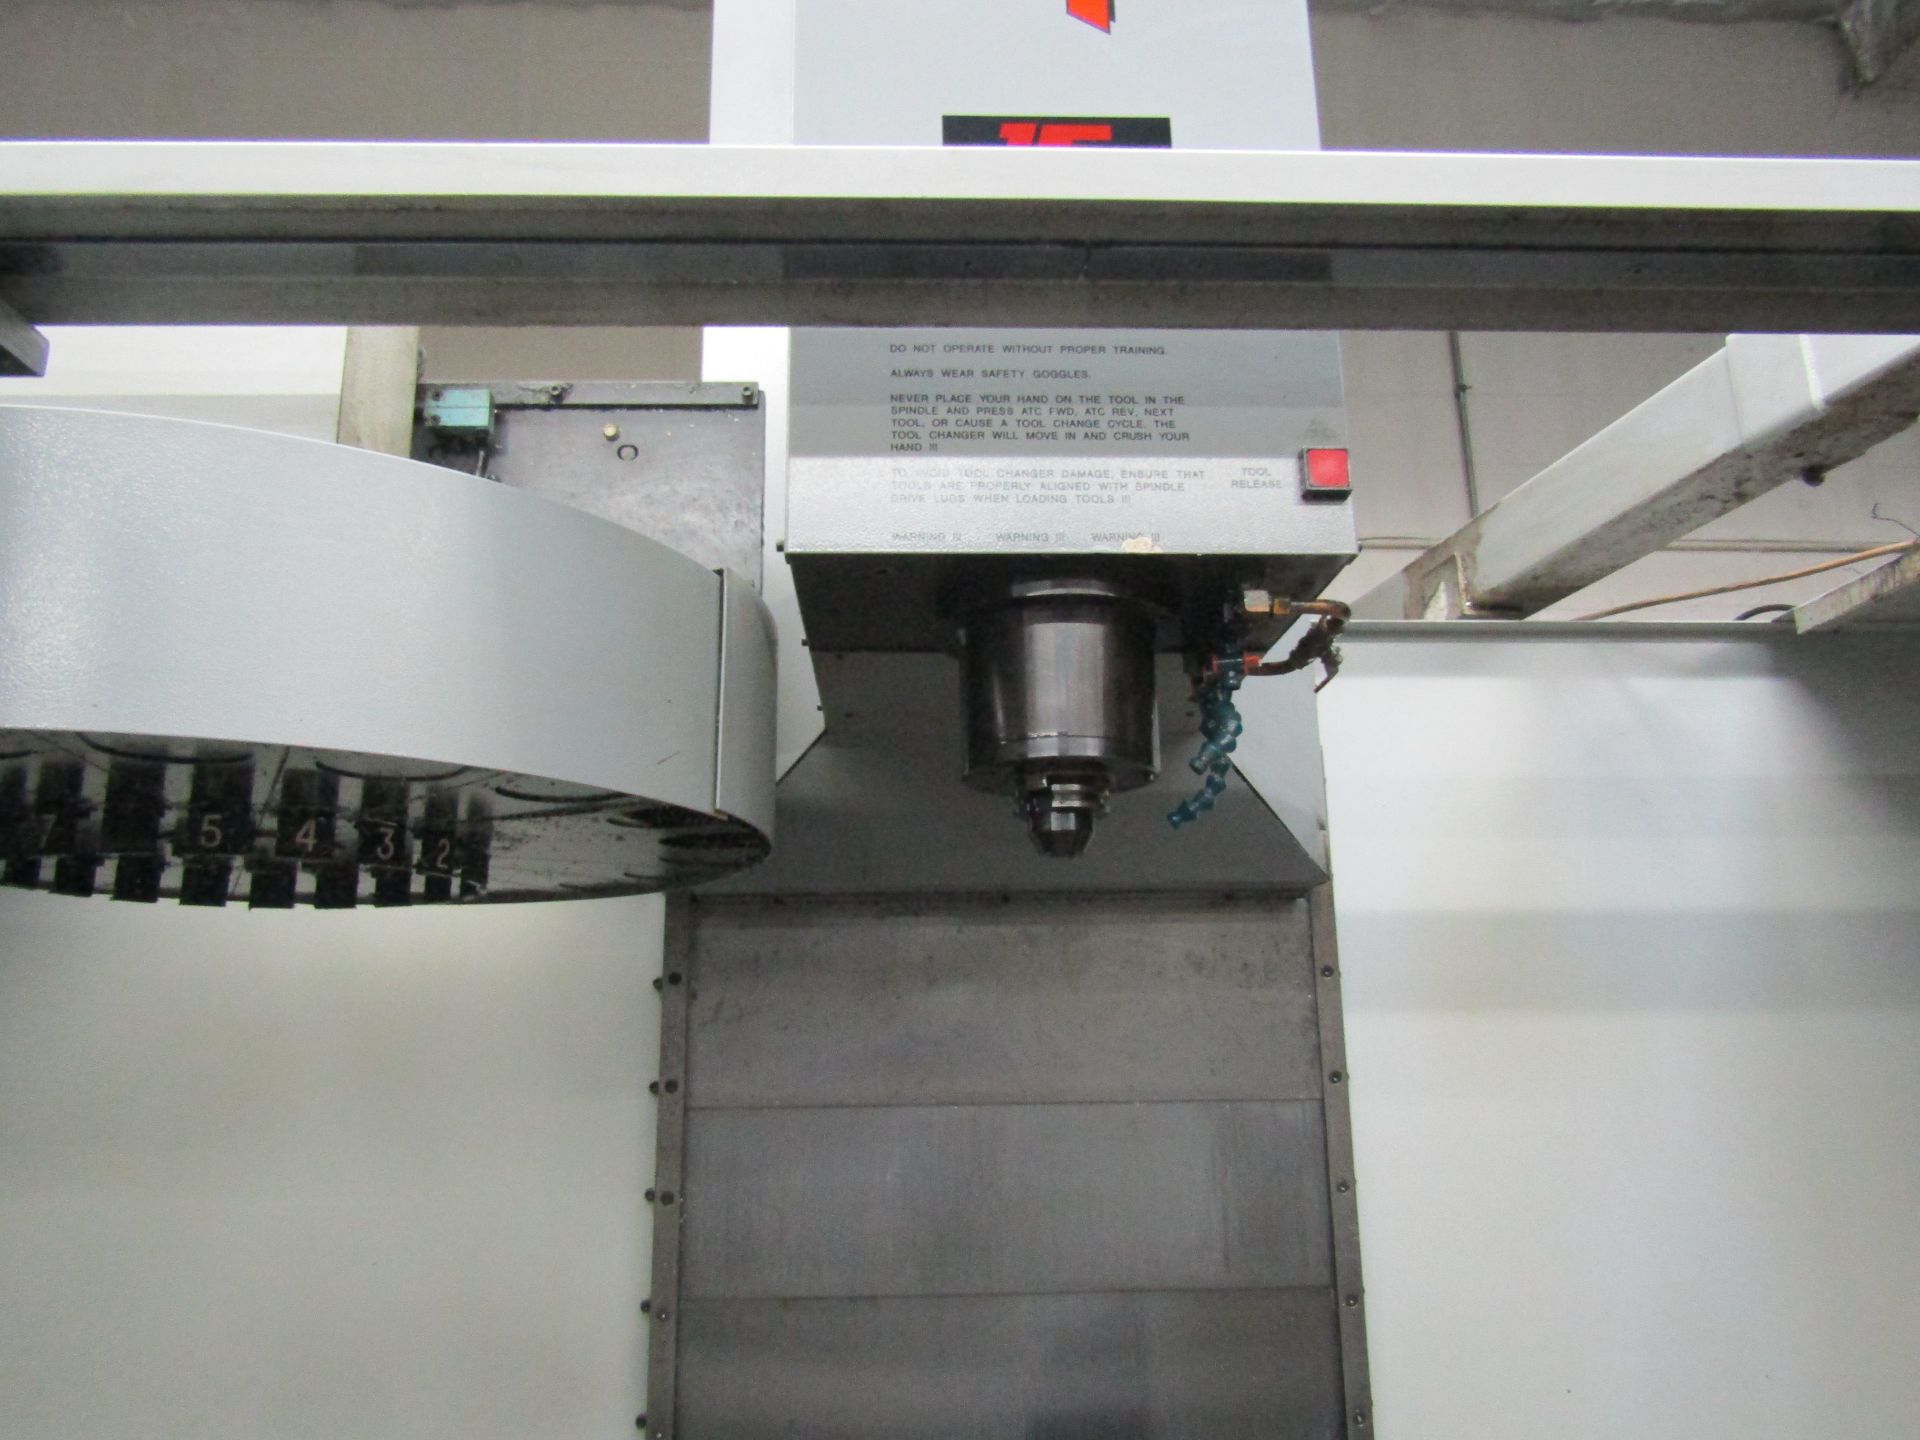 1995 HAAS VF-3 VERTICAL MACHINING CENTER, TRAVELS: 30 X 20 X 20, 21 ATC, HAAS CONTROL – SERIAL#: - Image 3 of 11